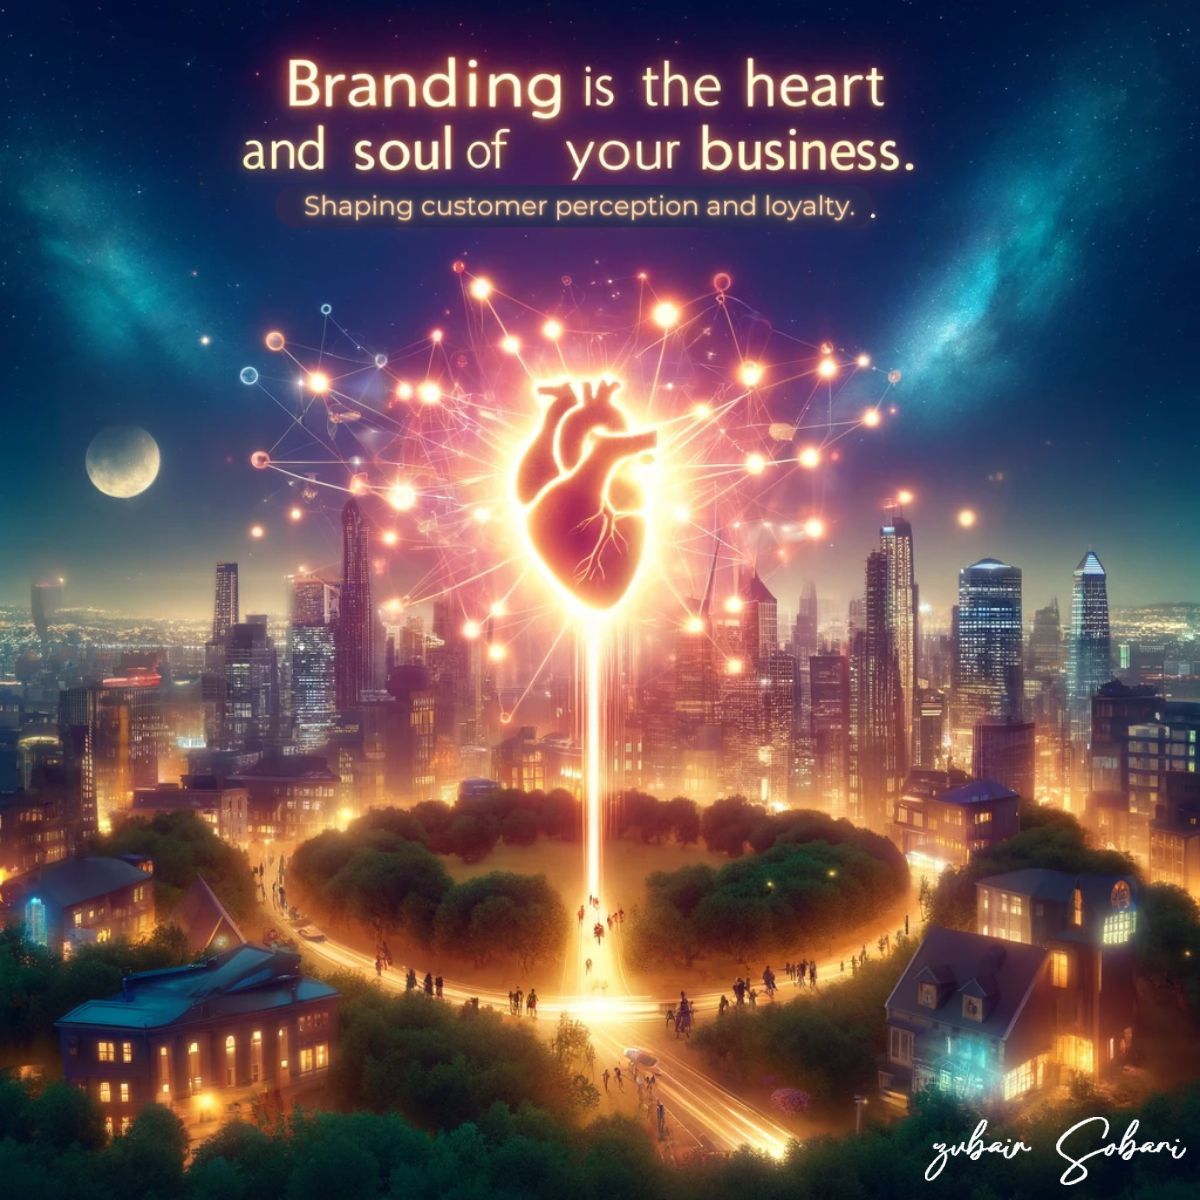 Branding isn't just about your logo. It's the heart and soul of your business, shaping customer perception and loyalty. #Branding101 #BusinessIdentity #ZubairSobani #Thinkventures #Thinkdirect #Canada #USA #KSA #UAE #Pakistan